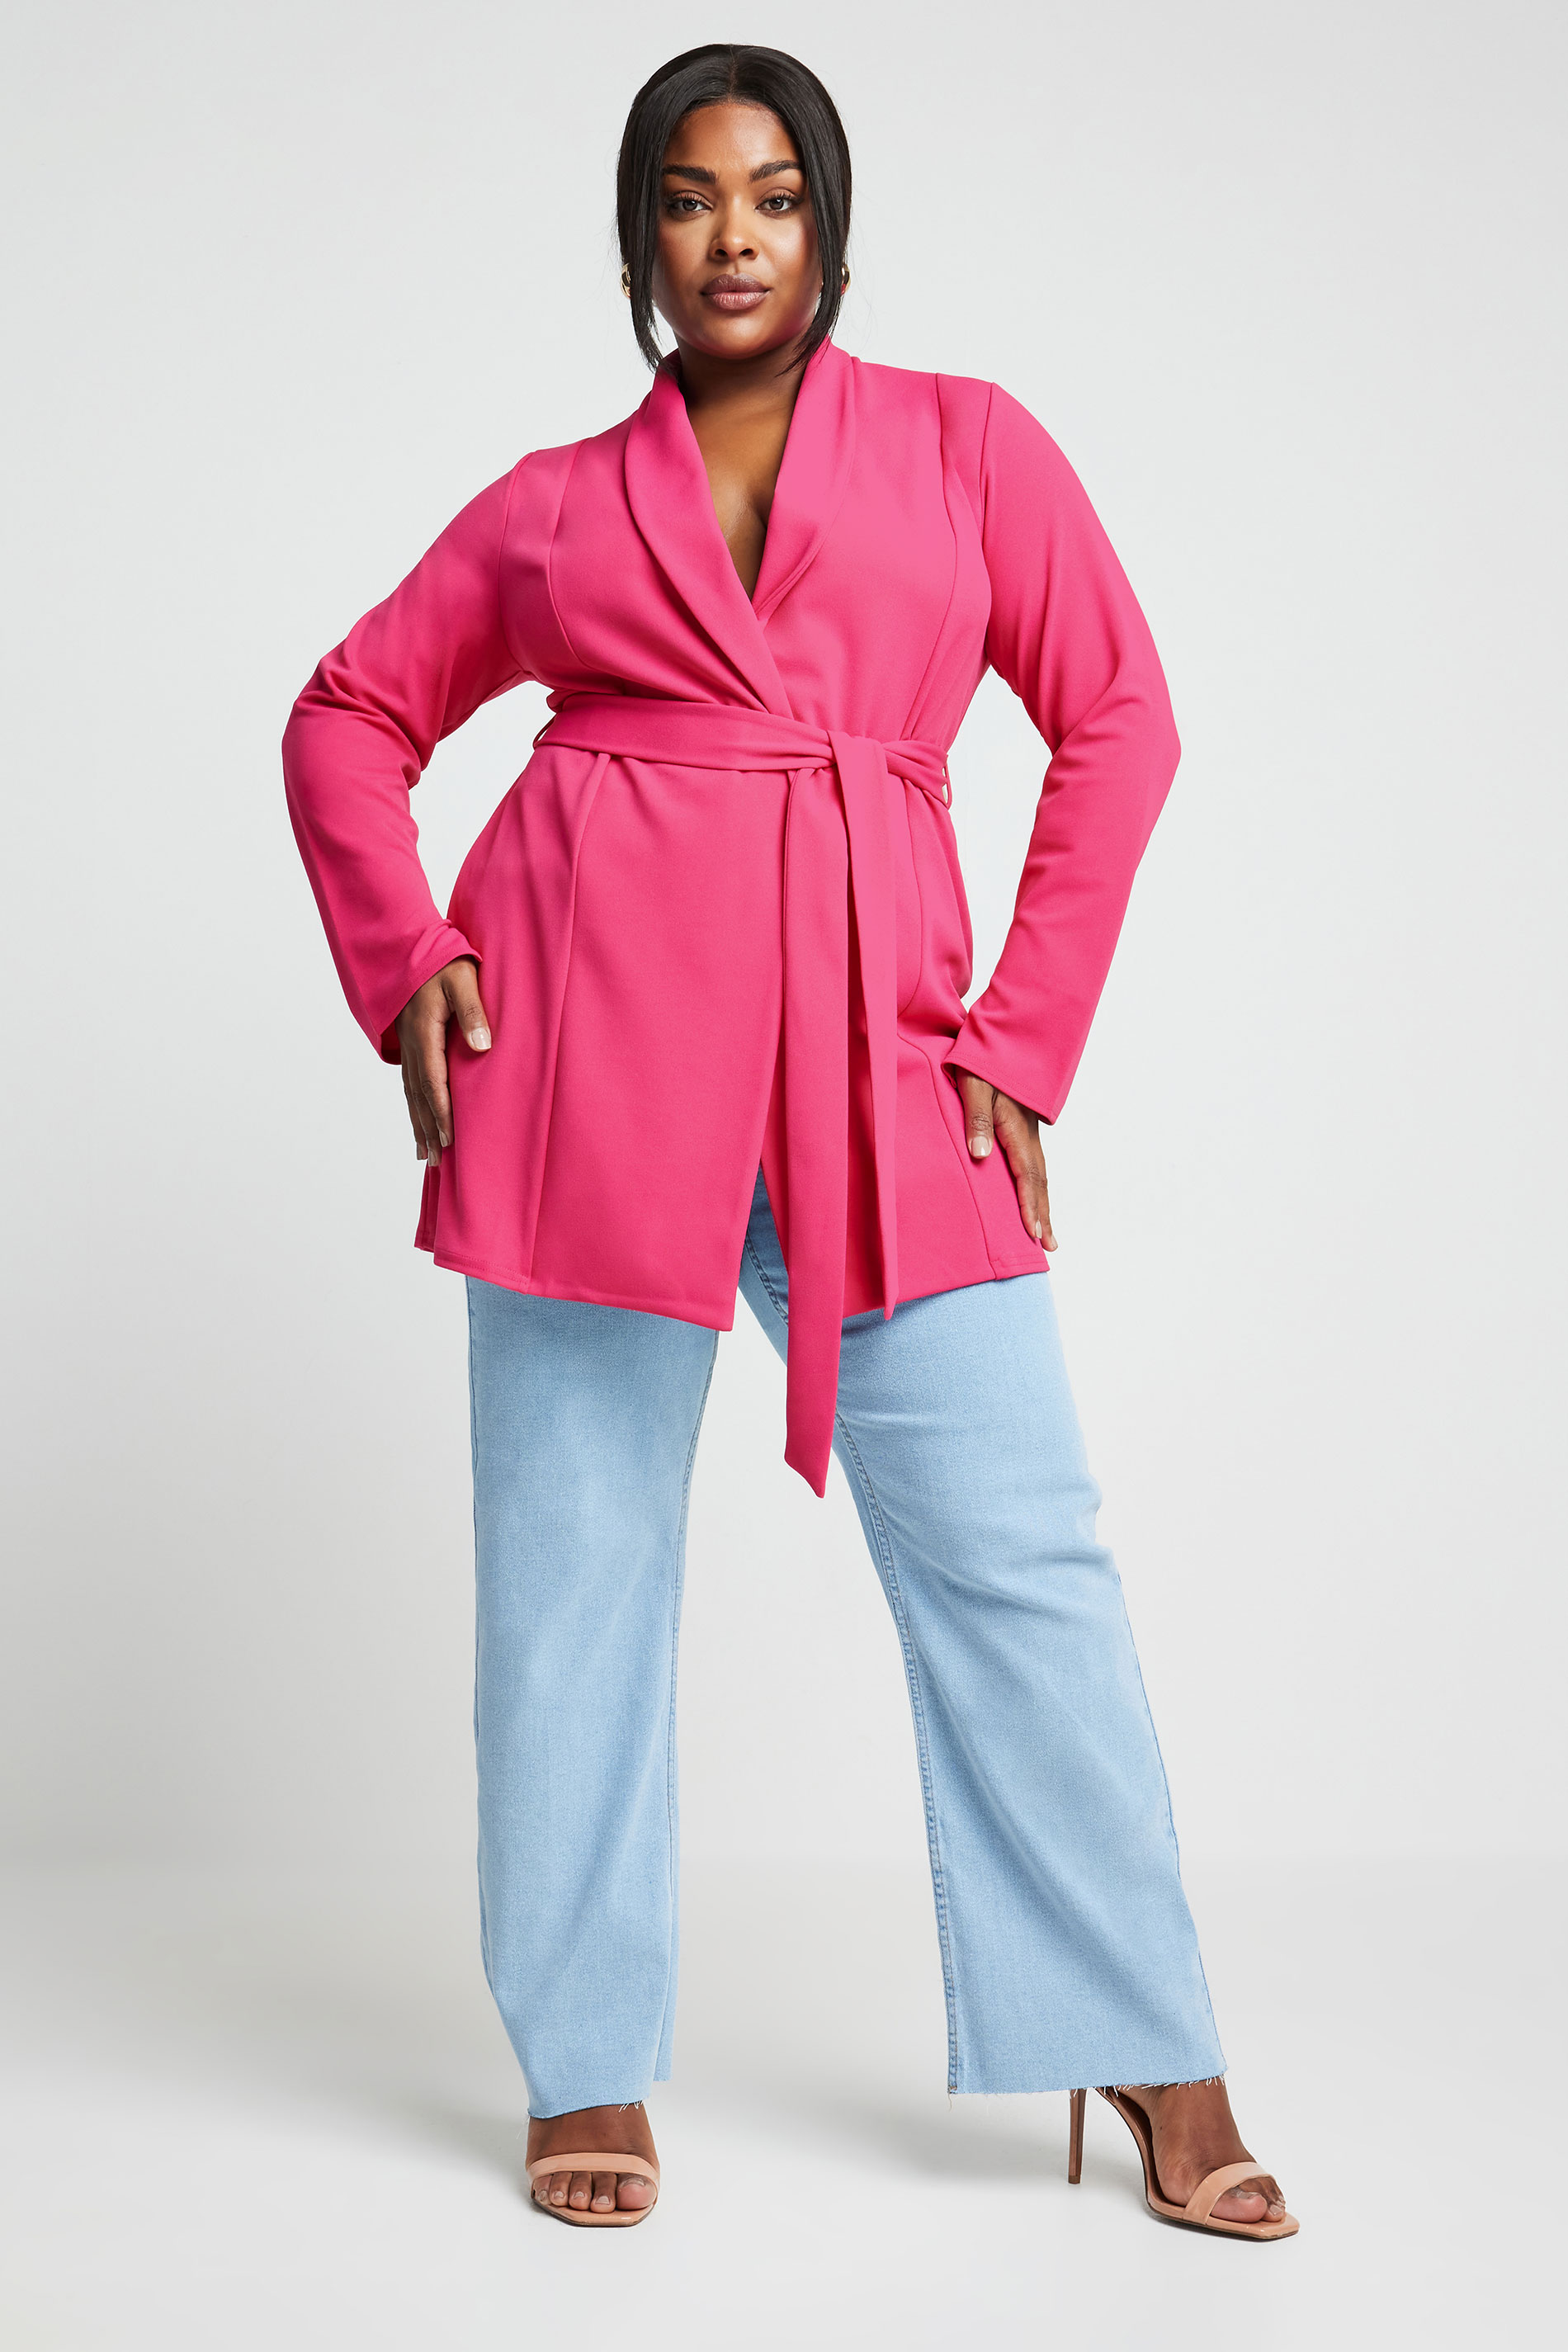 LIMITED COLLECTION Plus Size Hot Pink Blazer | Yours Clothing 2